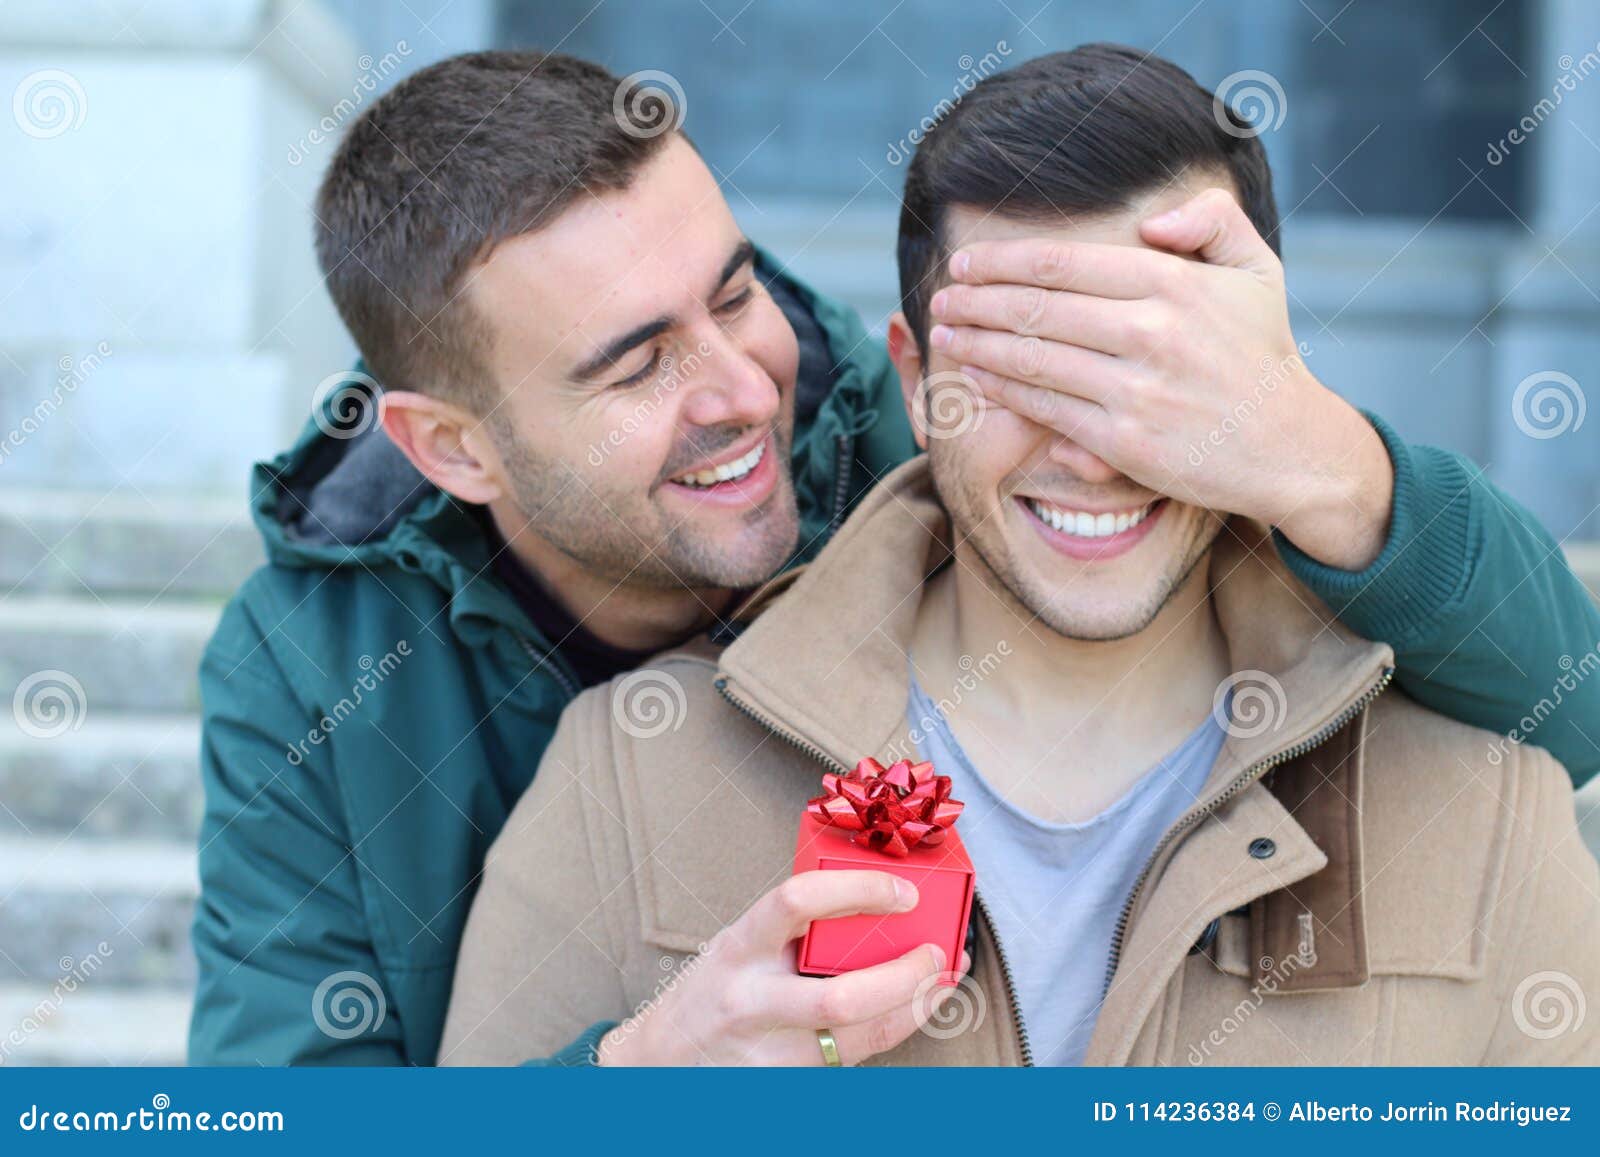 Lovely Same Sex Couple Sharing Affection Stock Photo pic